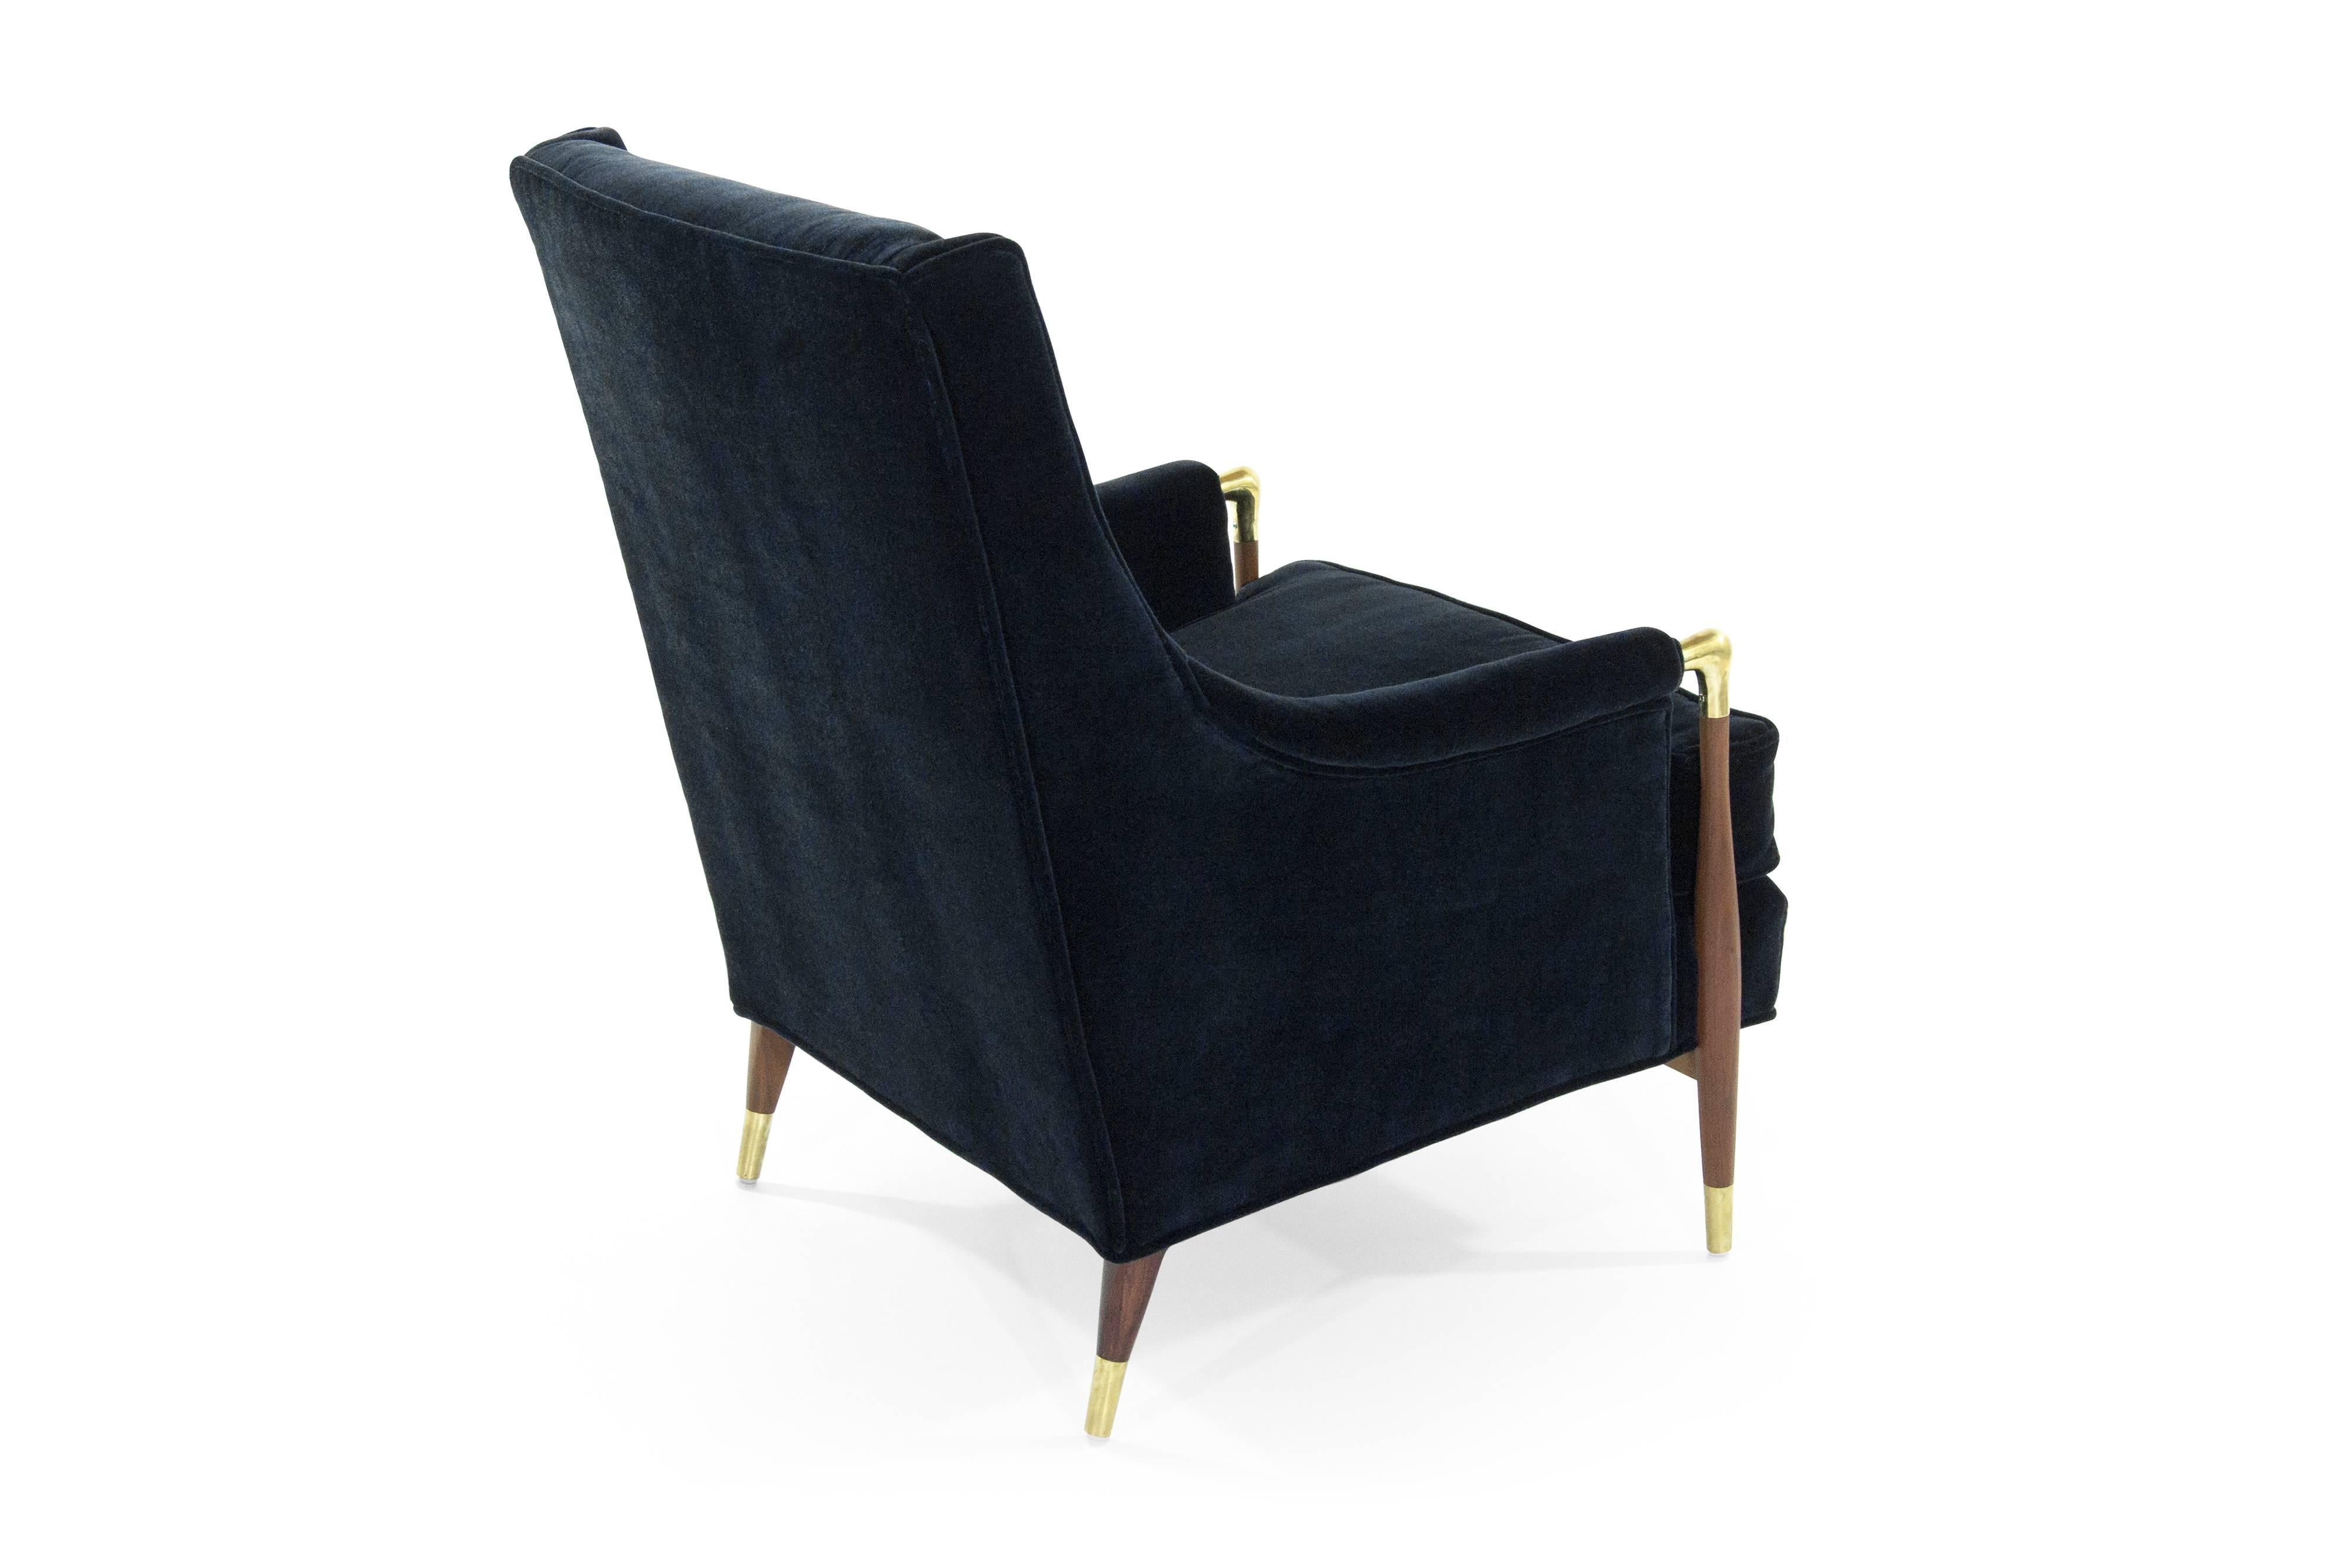 Mid-Century Modern Sculptural Gio Ponti Style Lounge Chair, 1950s